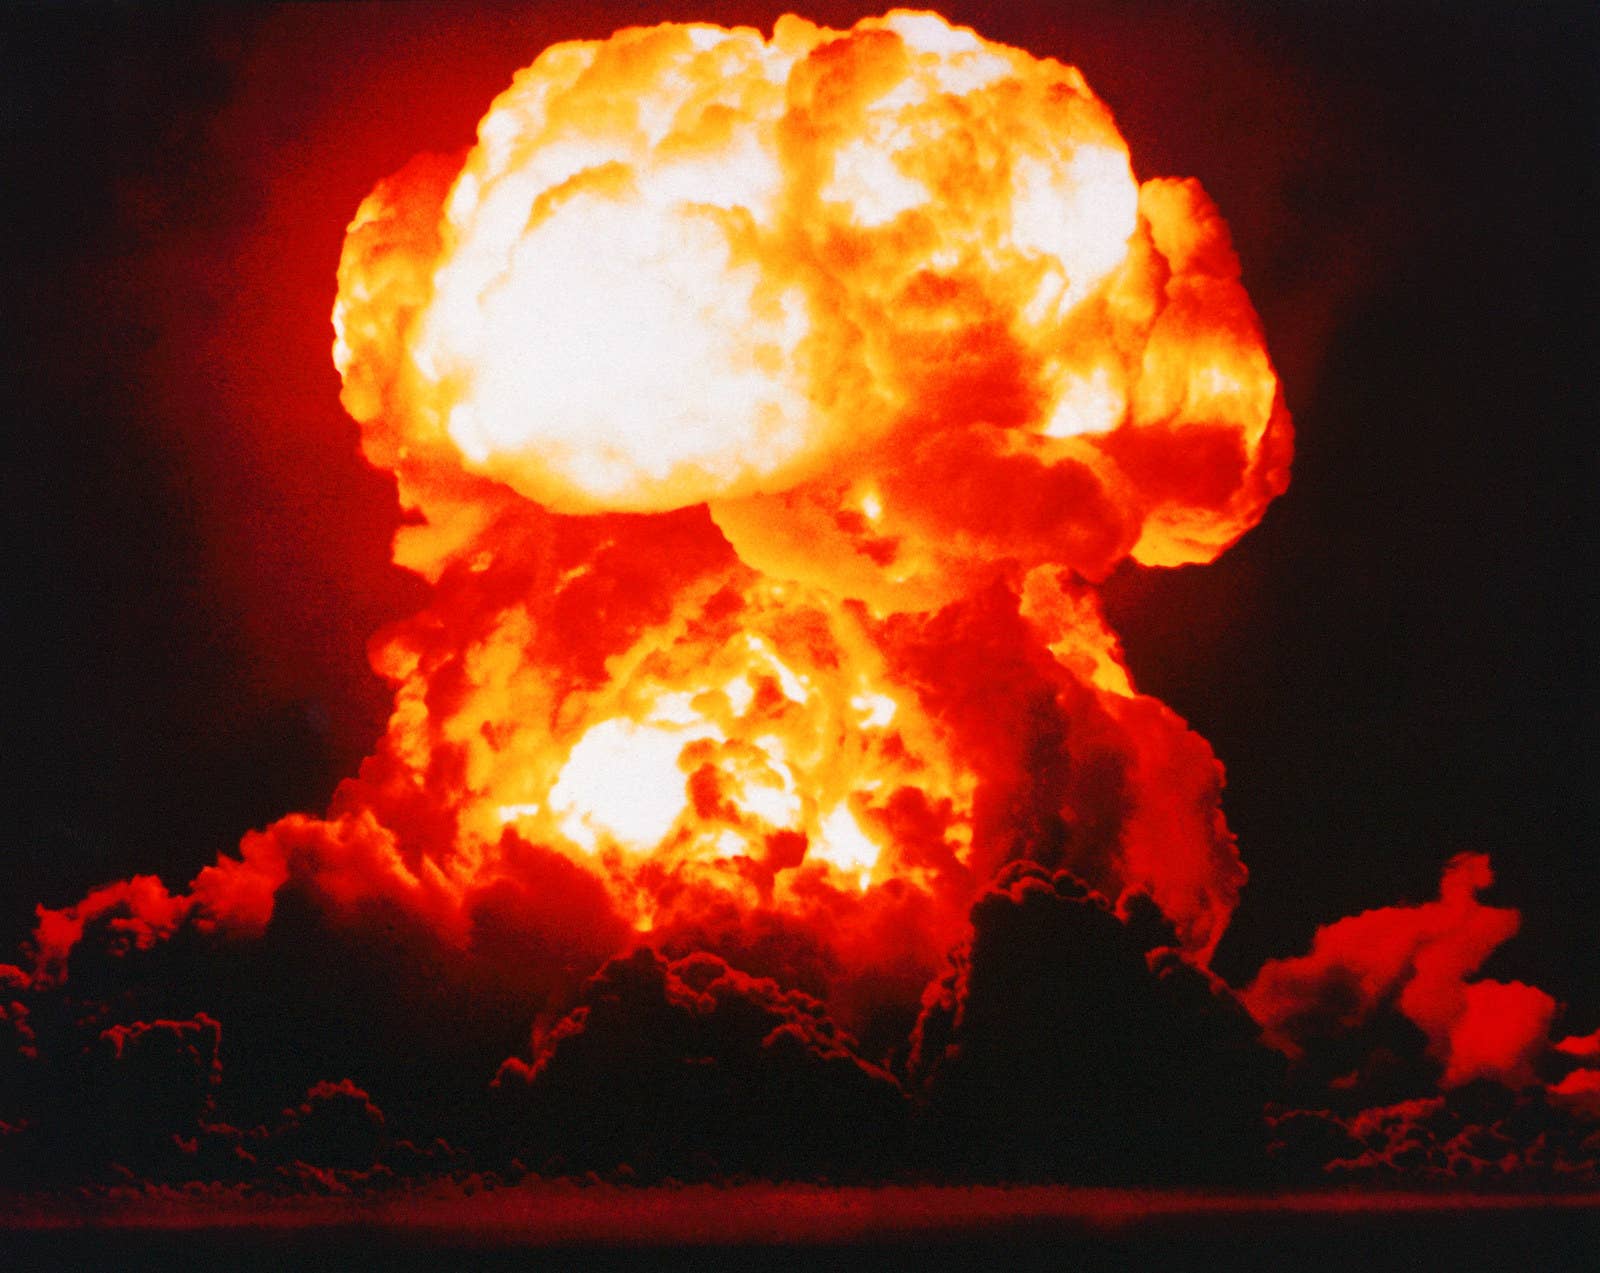 The atomic bomb nicknamed 'Smokey' is detonated in the Nevada desert as part of Operation Plumb Bob in 1957.